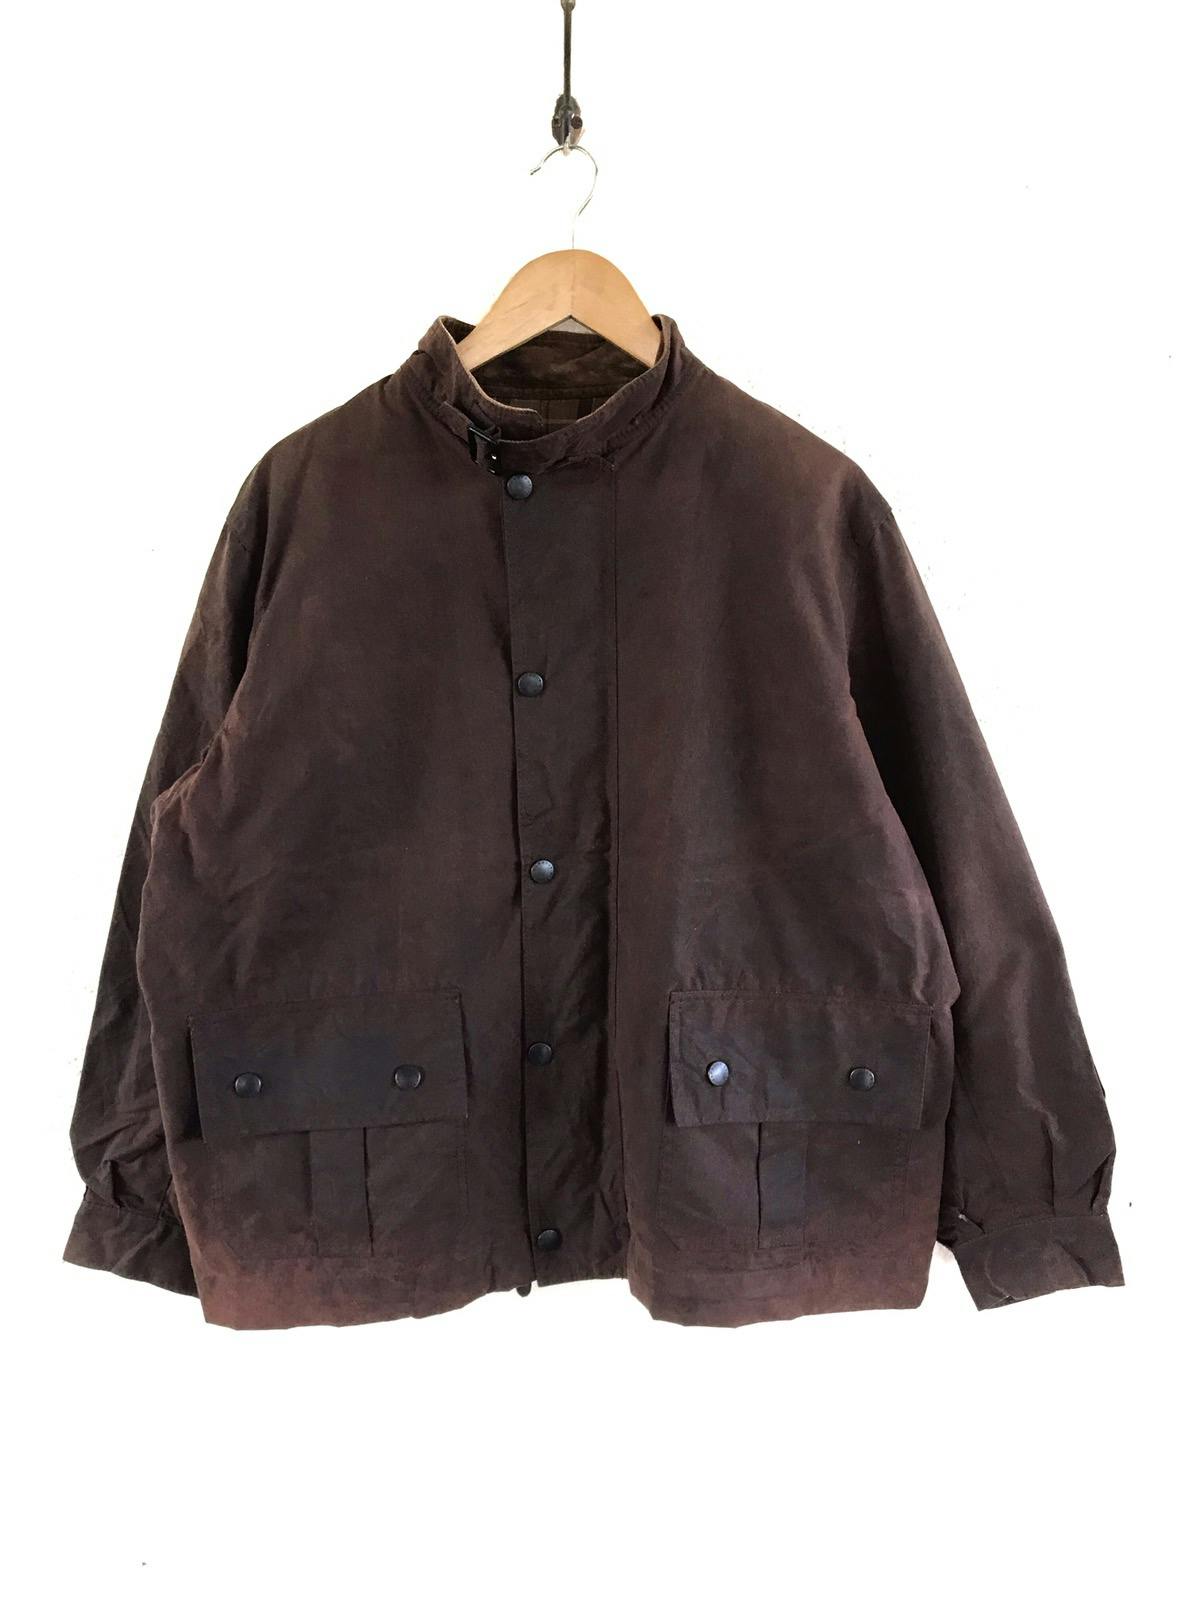 Barbour Wax Jacket Made in England - 1